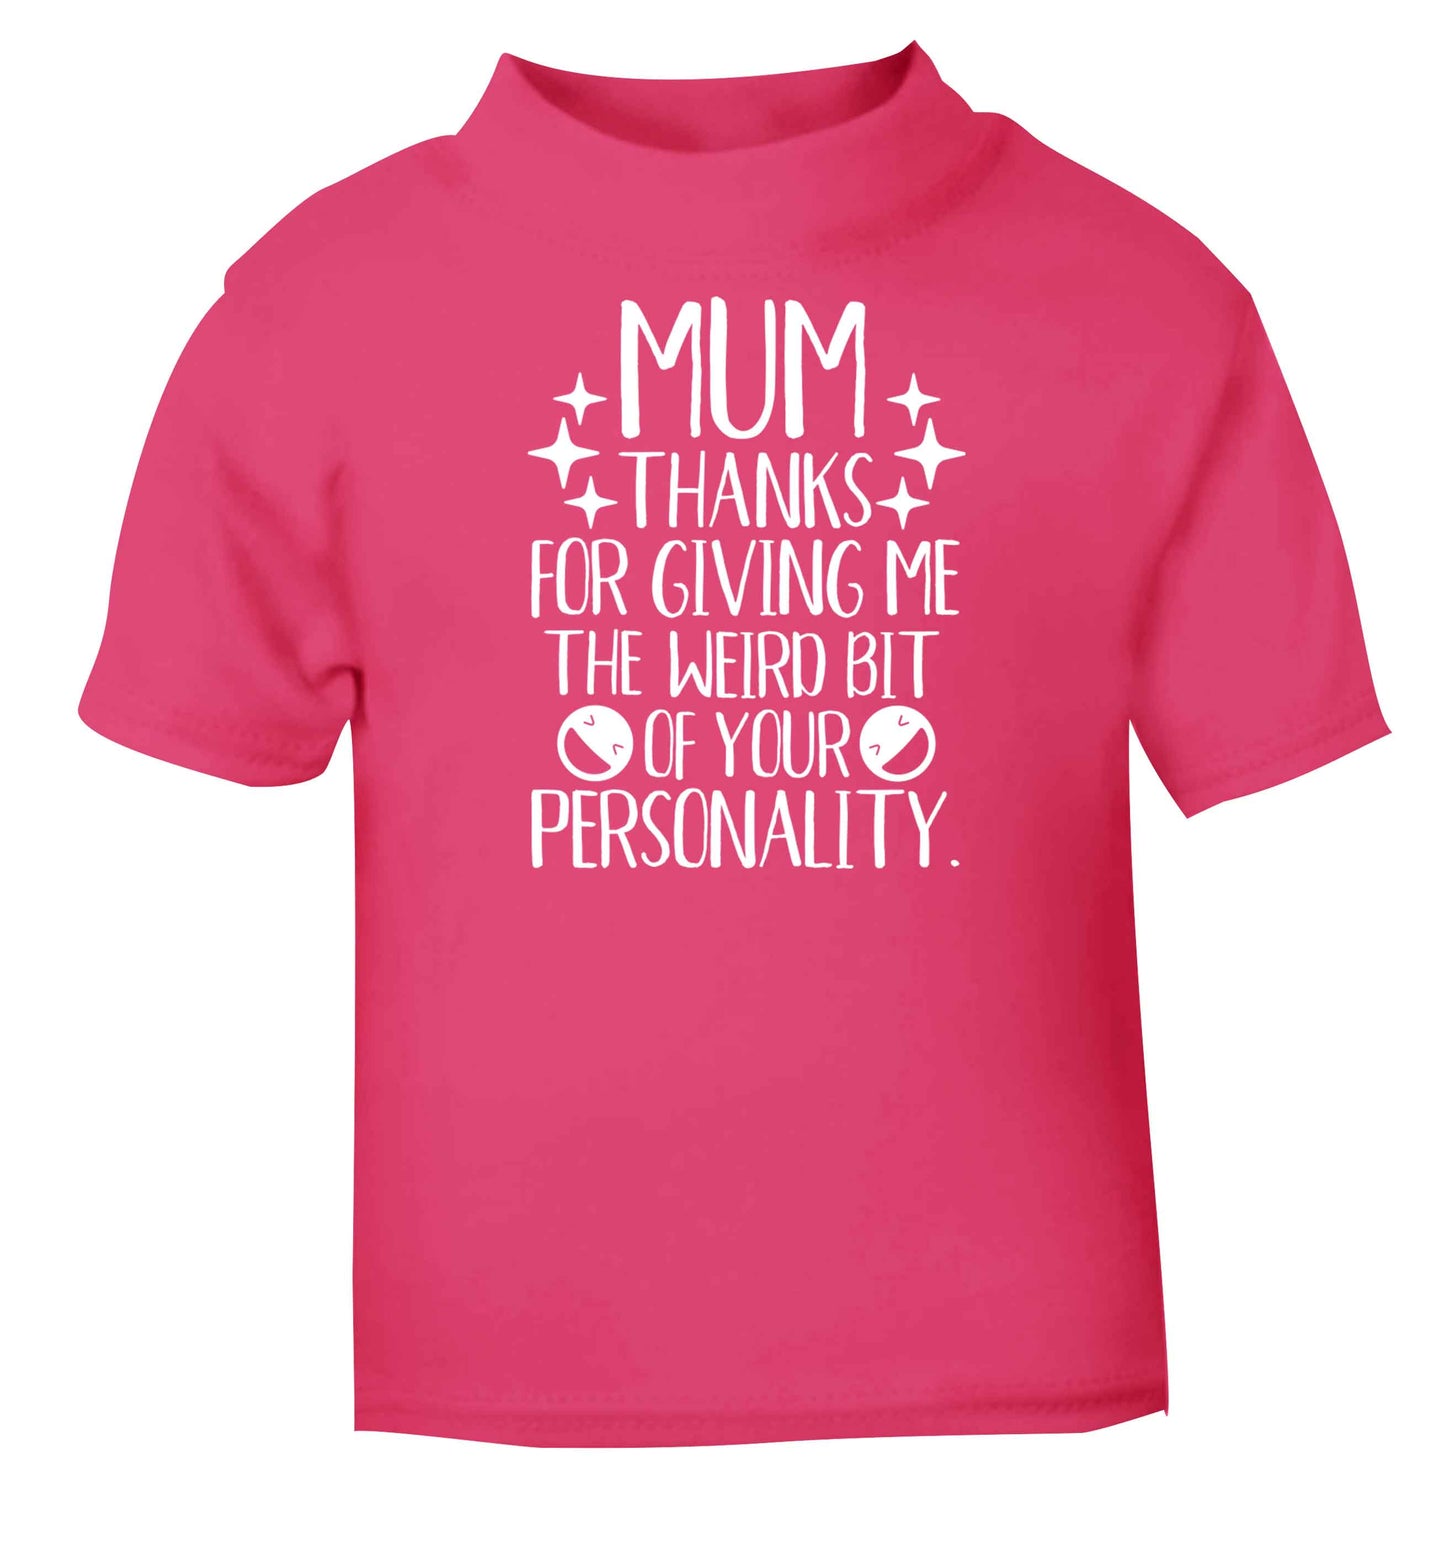 Mum thanks for giving me the weird bit of your personality pink baby toddler Tshirt 2 Years